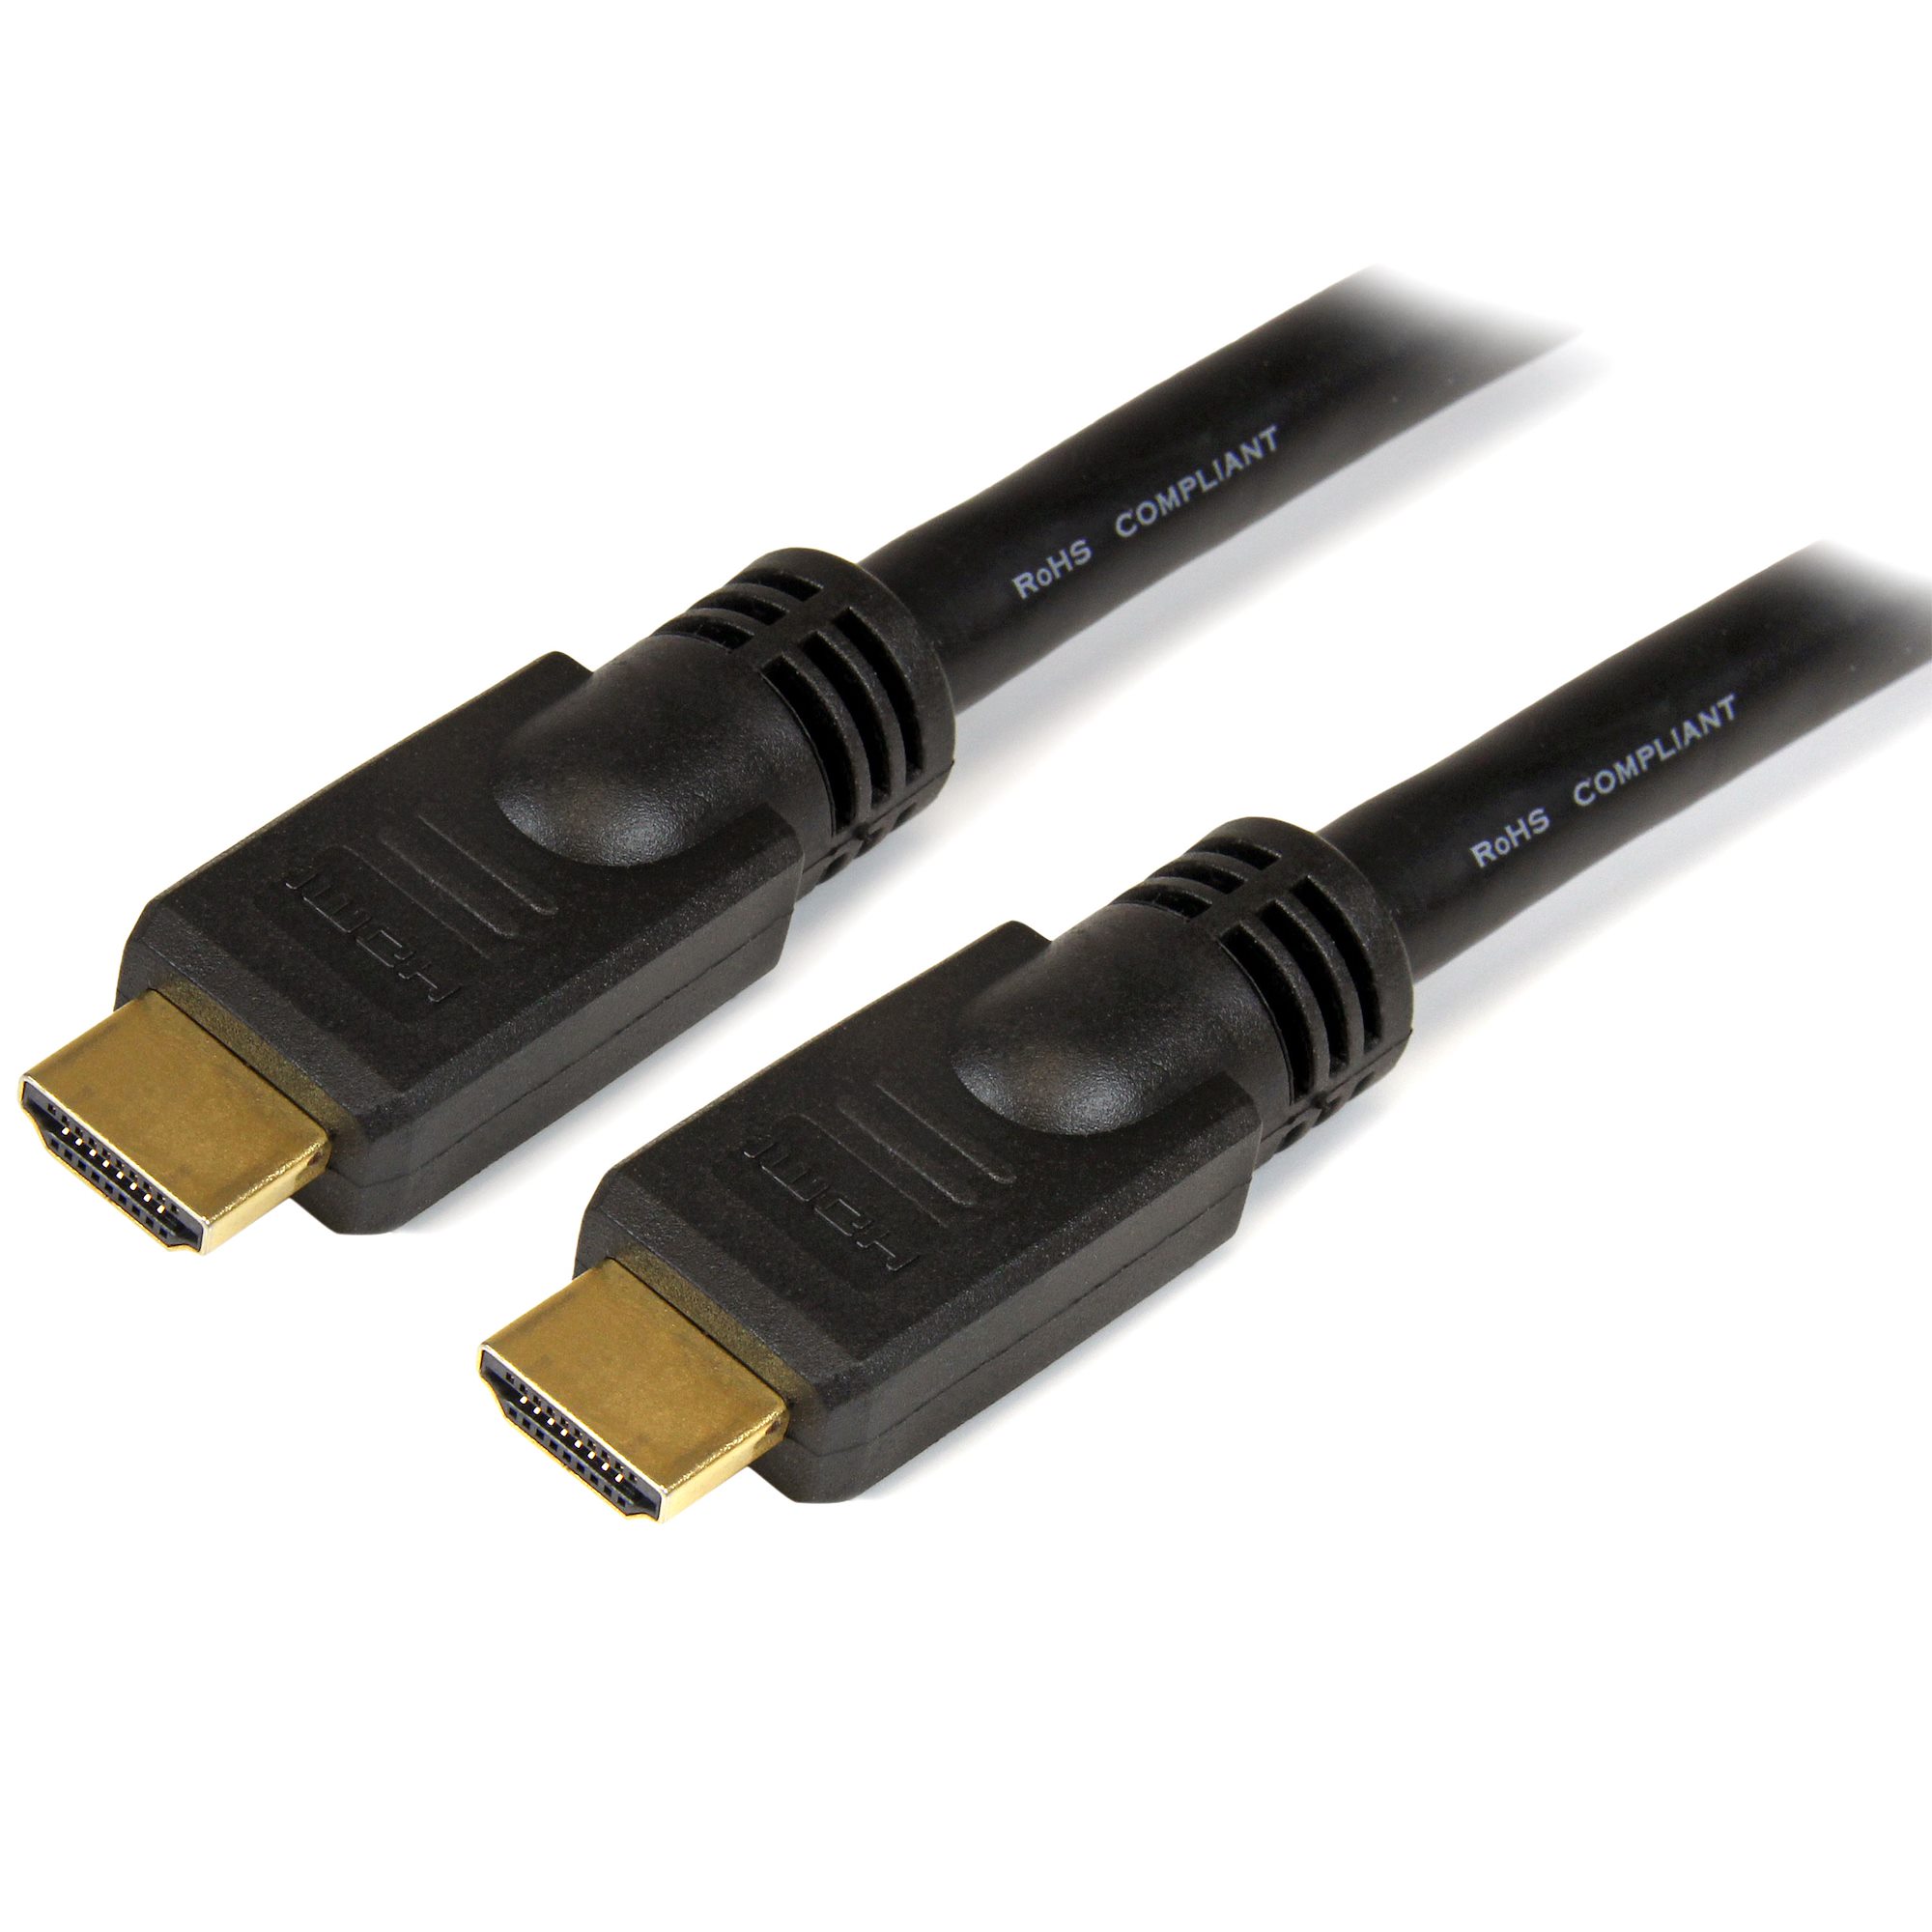 【HDMM25】25 FT HIGH SPEED HDMI CABLE - UL